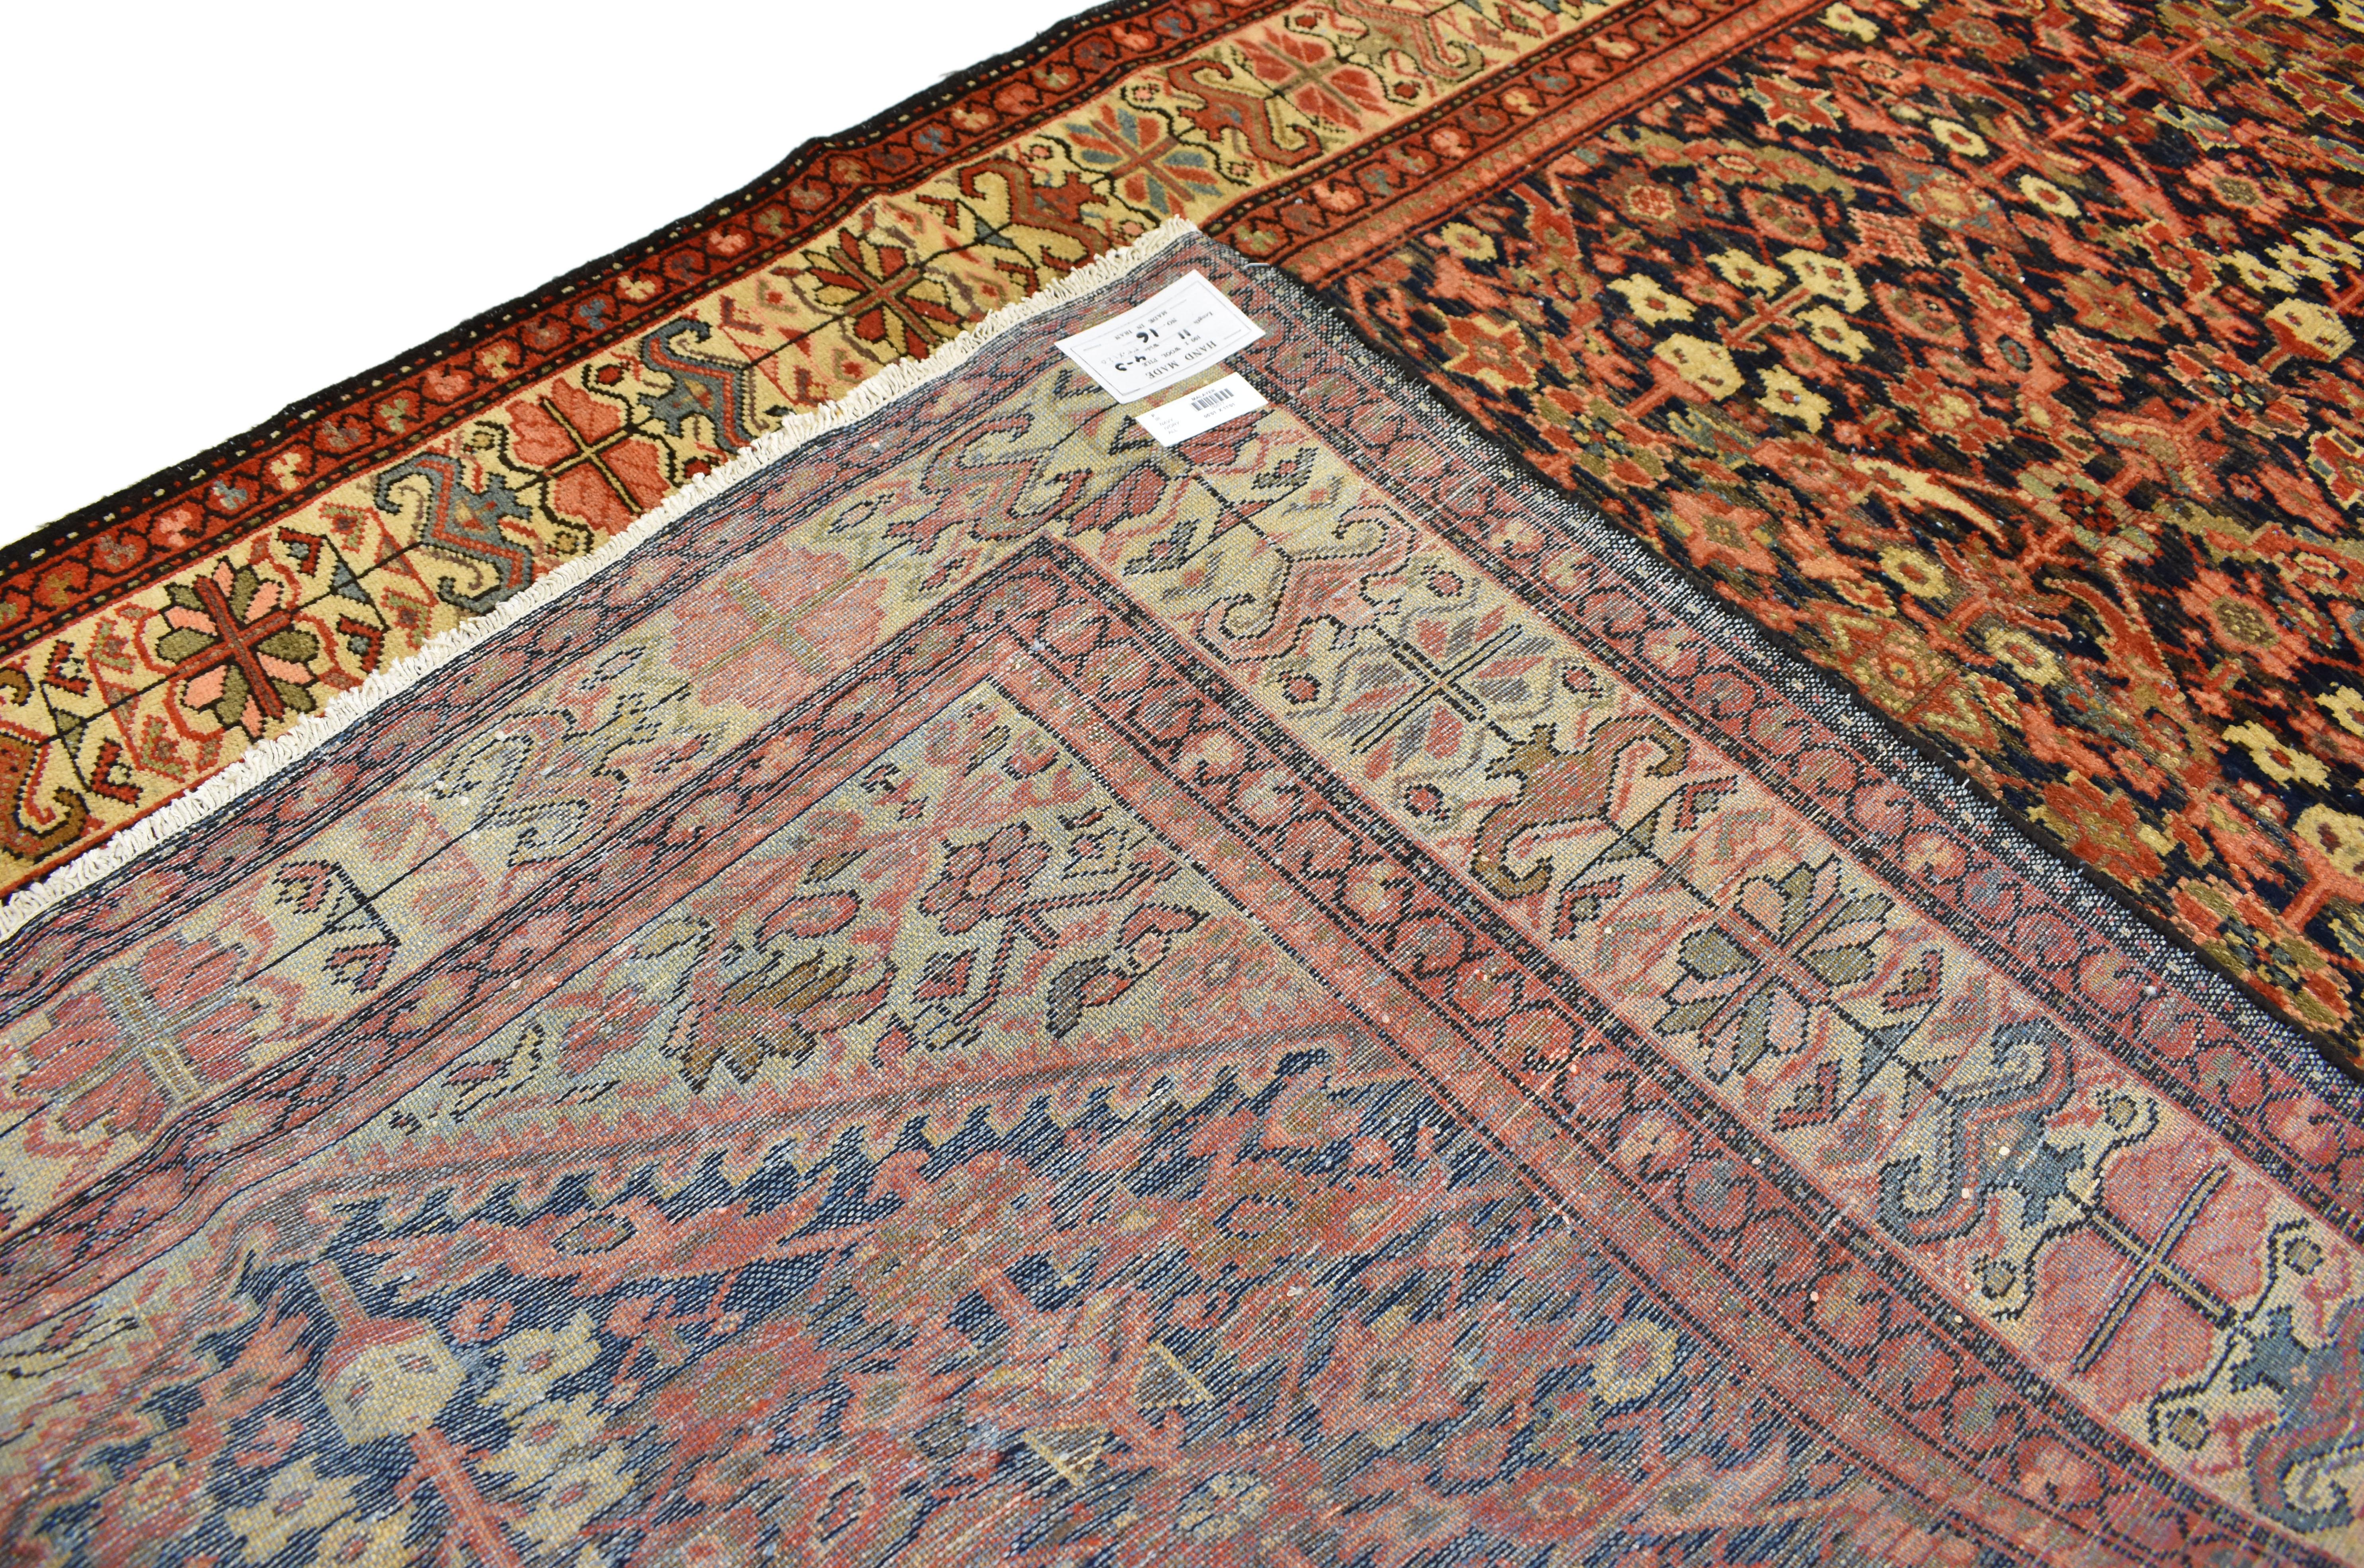 Antique Persian Malayer Gallery Rug, Hallway Runner with Guli Hennai Flower In Good Condition For Sale In Dallas, TX